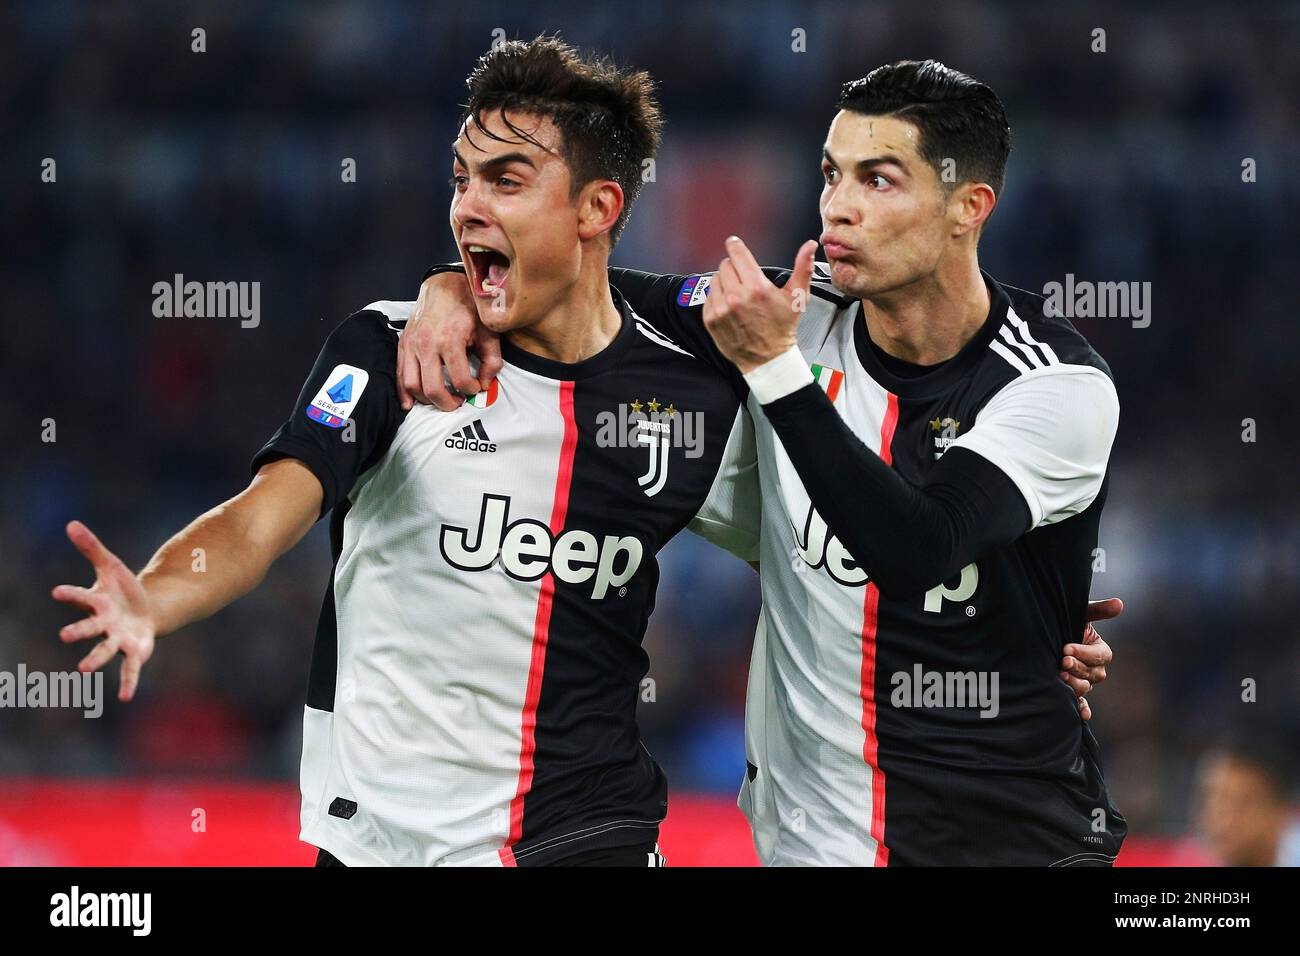 Cristiano Ronaldo of Juventus celebrates with Paulo Dybala after scoring  0-1 goal during the Italian championship Serie A football match between SS  Lazio and Juventus on December 7, 2019 at Stadio Olimpico